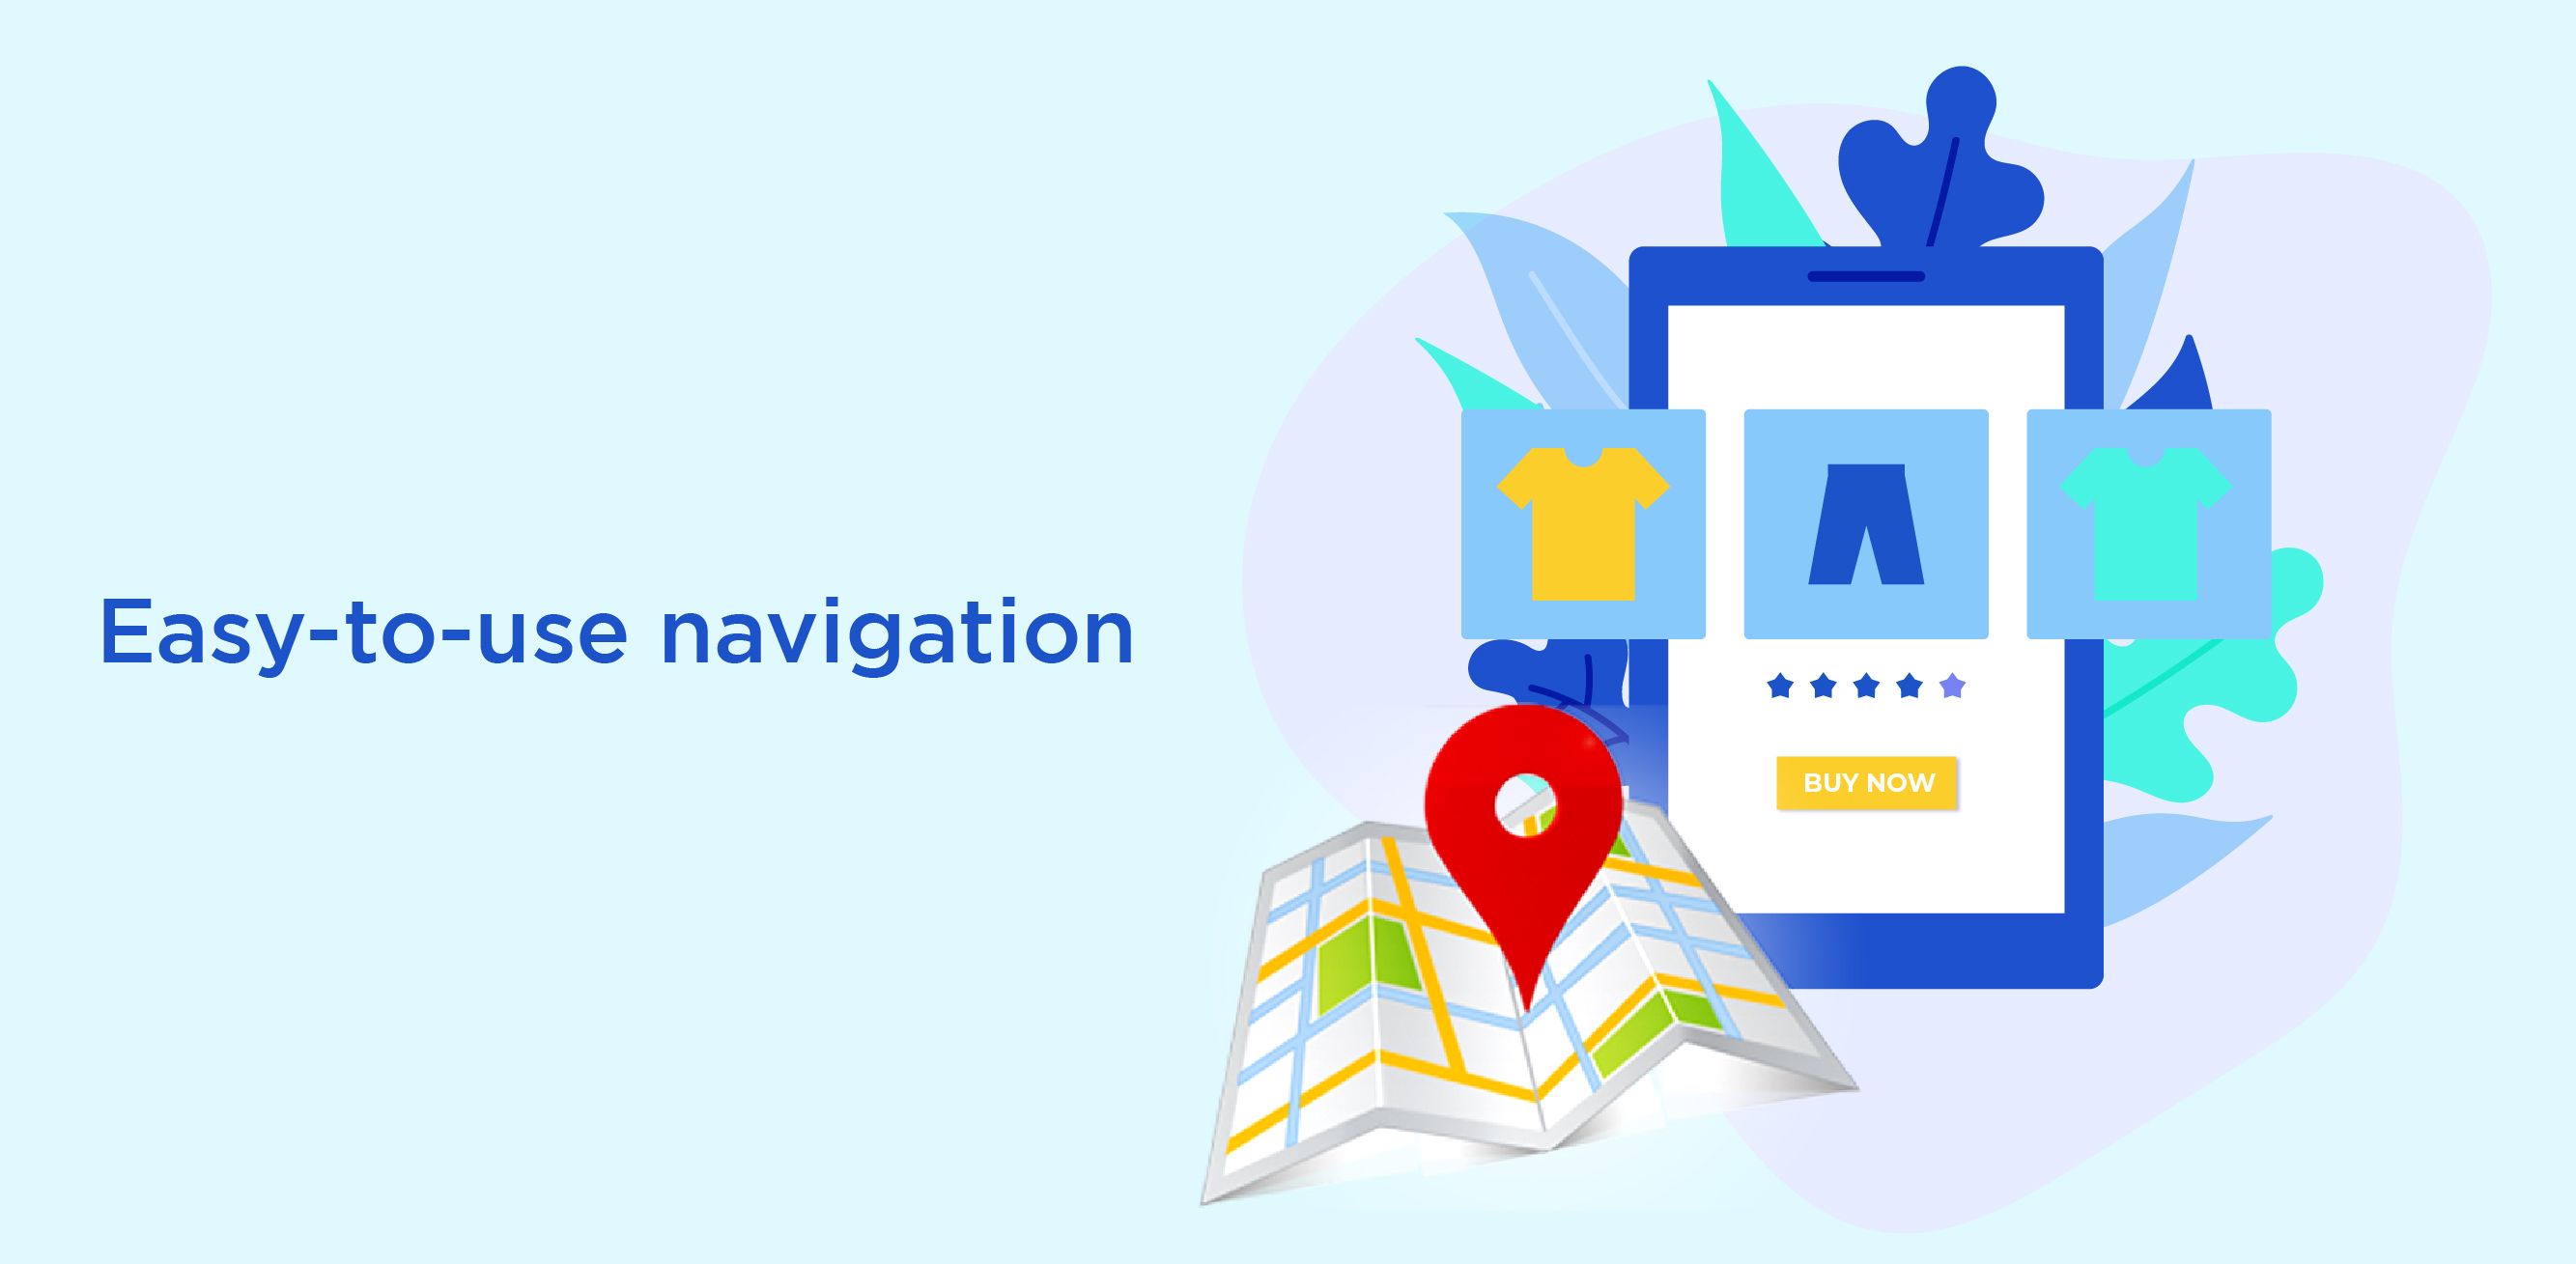 Easy-to-use navigation